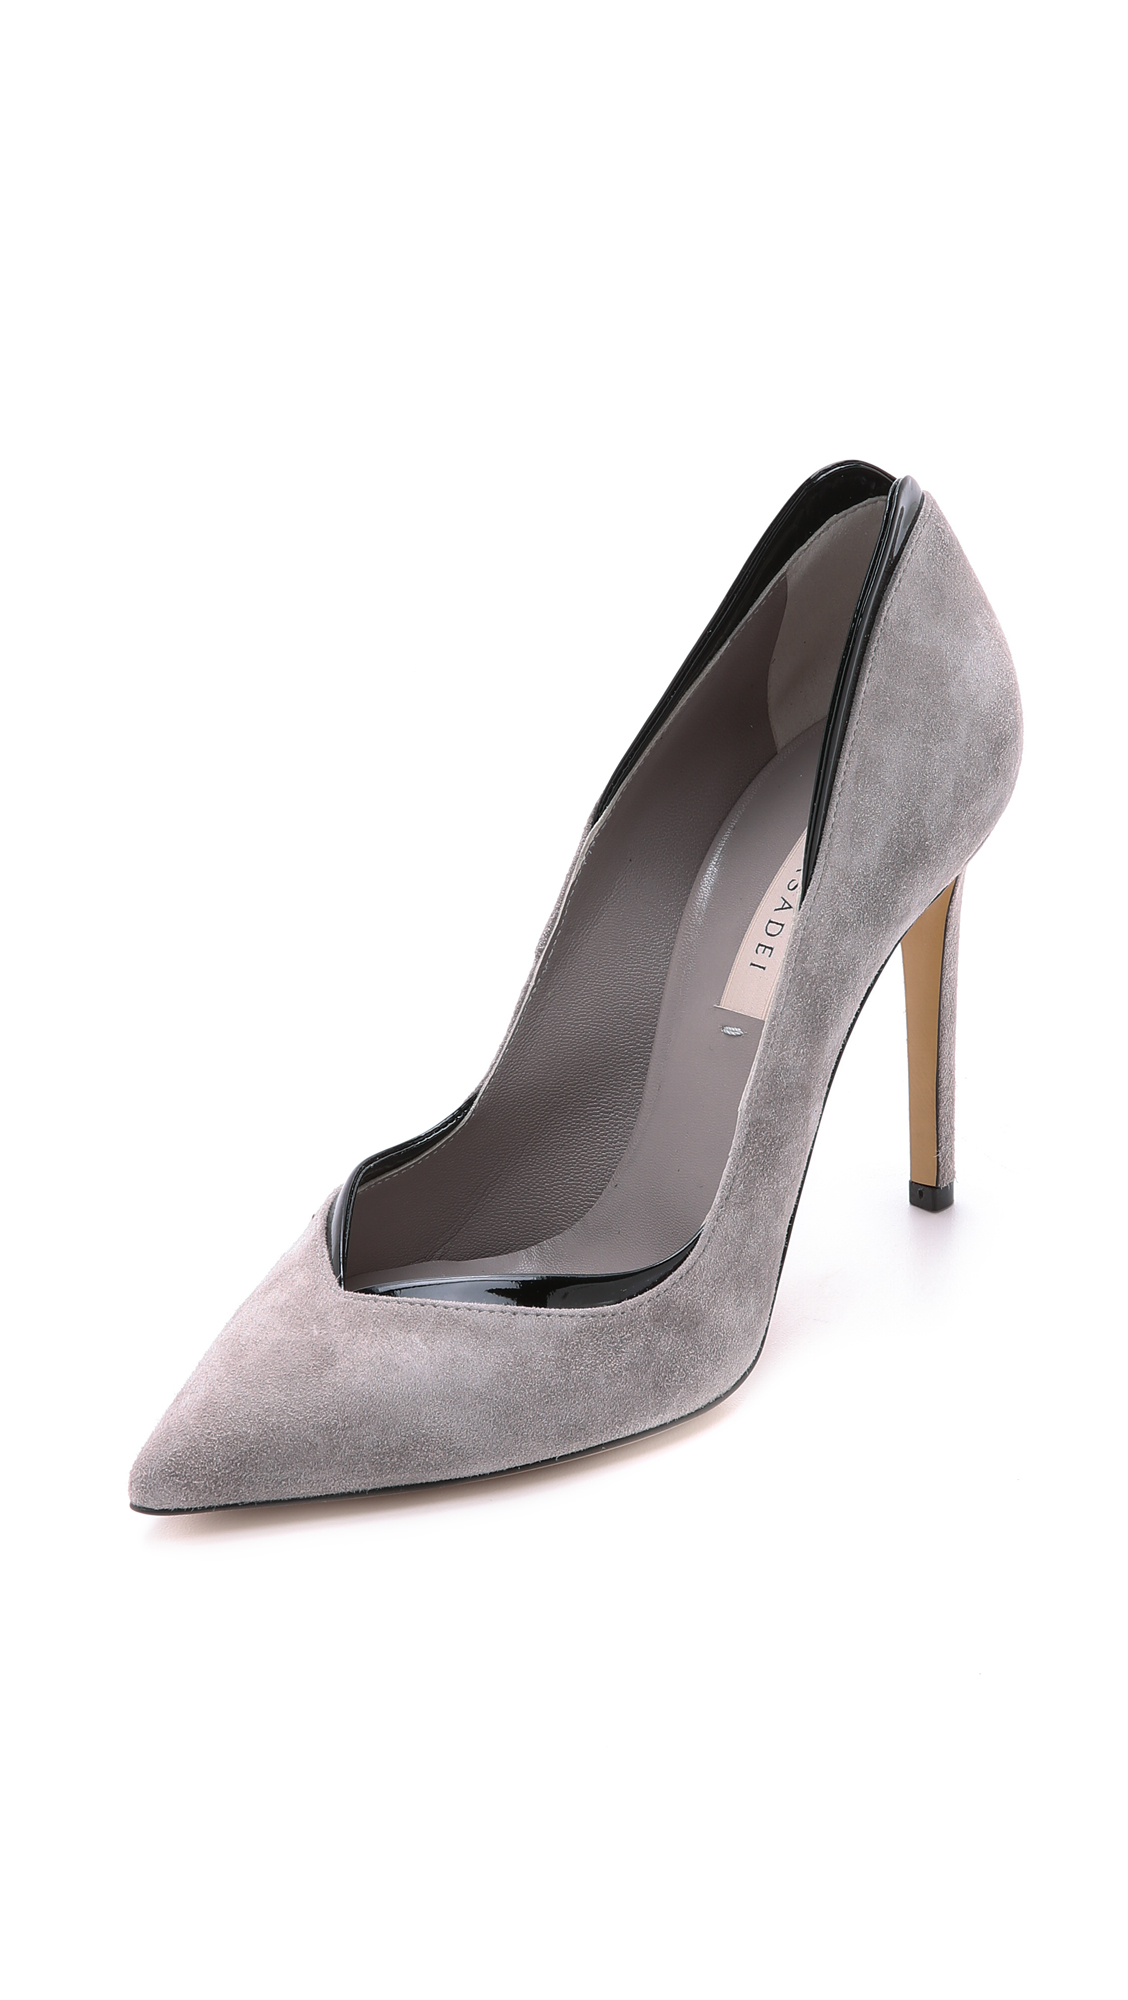 Grey Pumps – Classy Items to Pair with Them